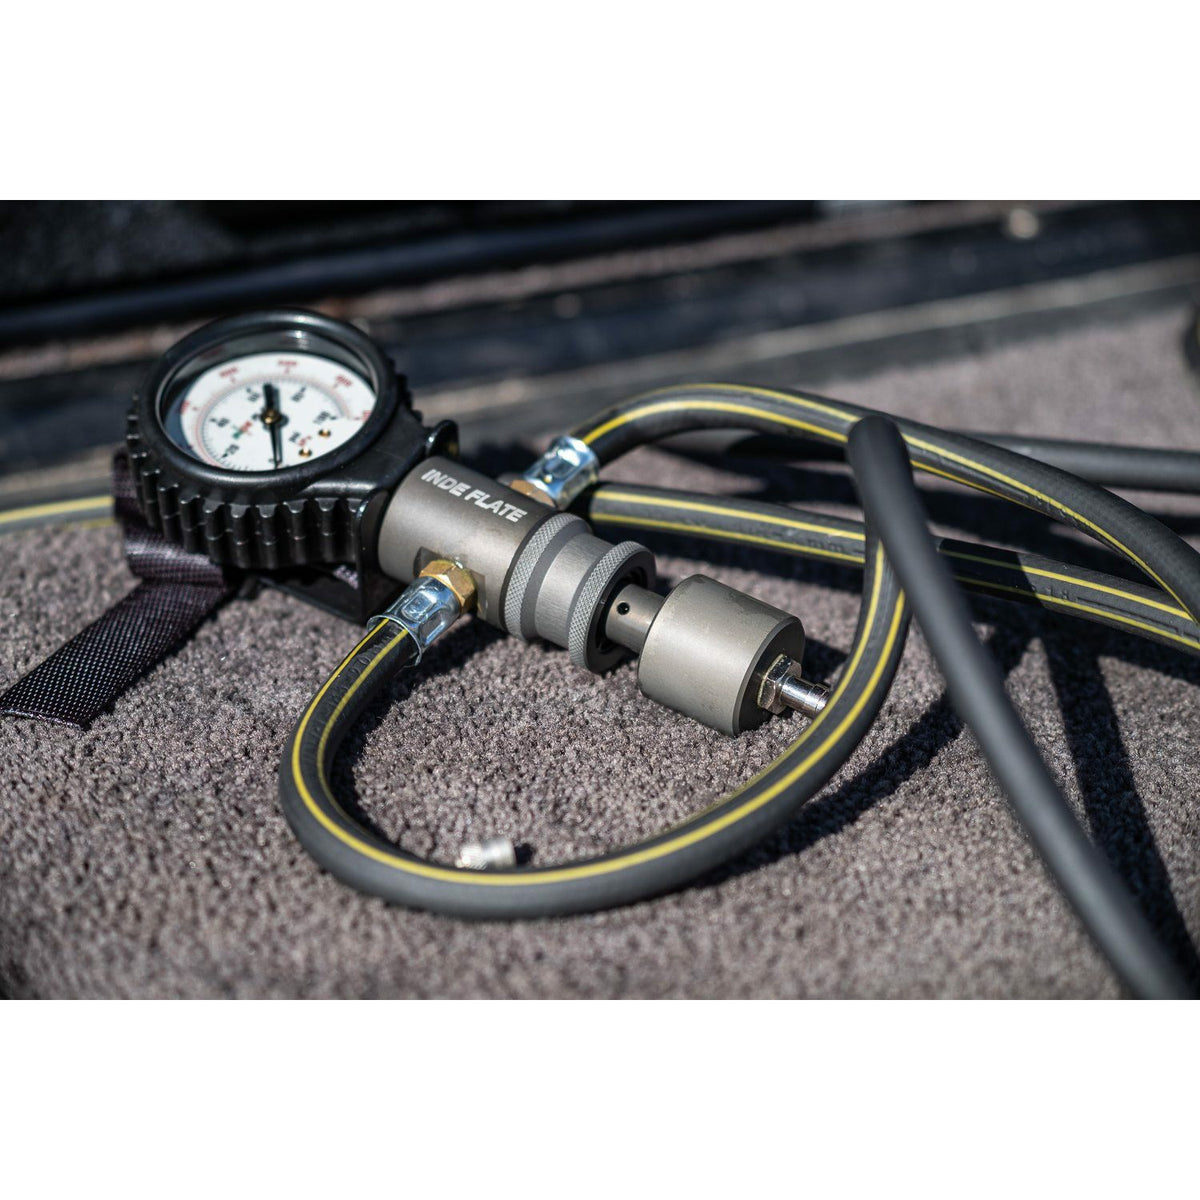 Indeflate Four Hose Unit  Air Tools Indeflate- Overland Kitted